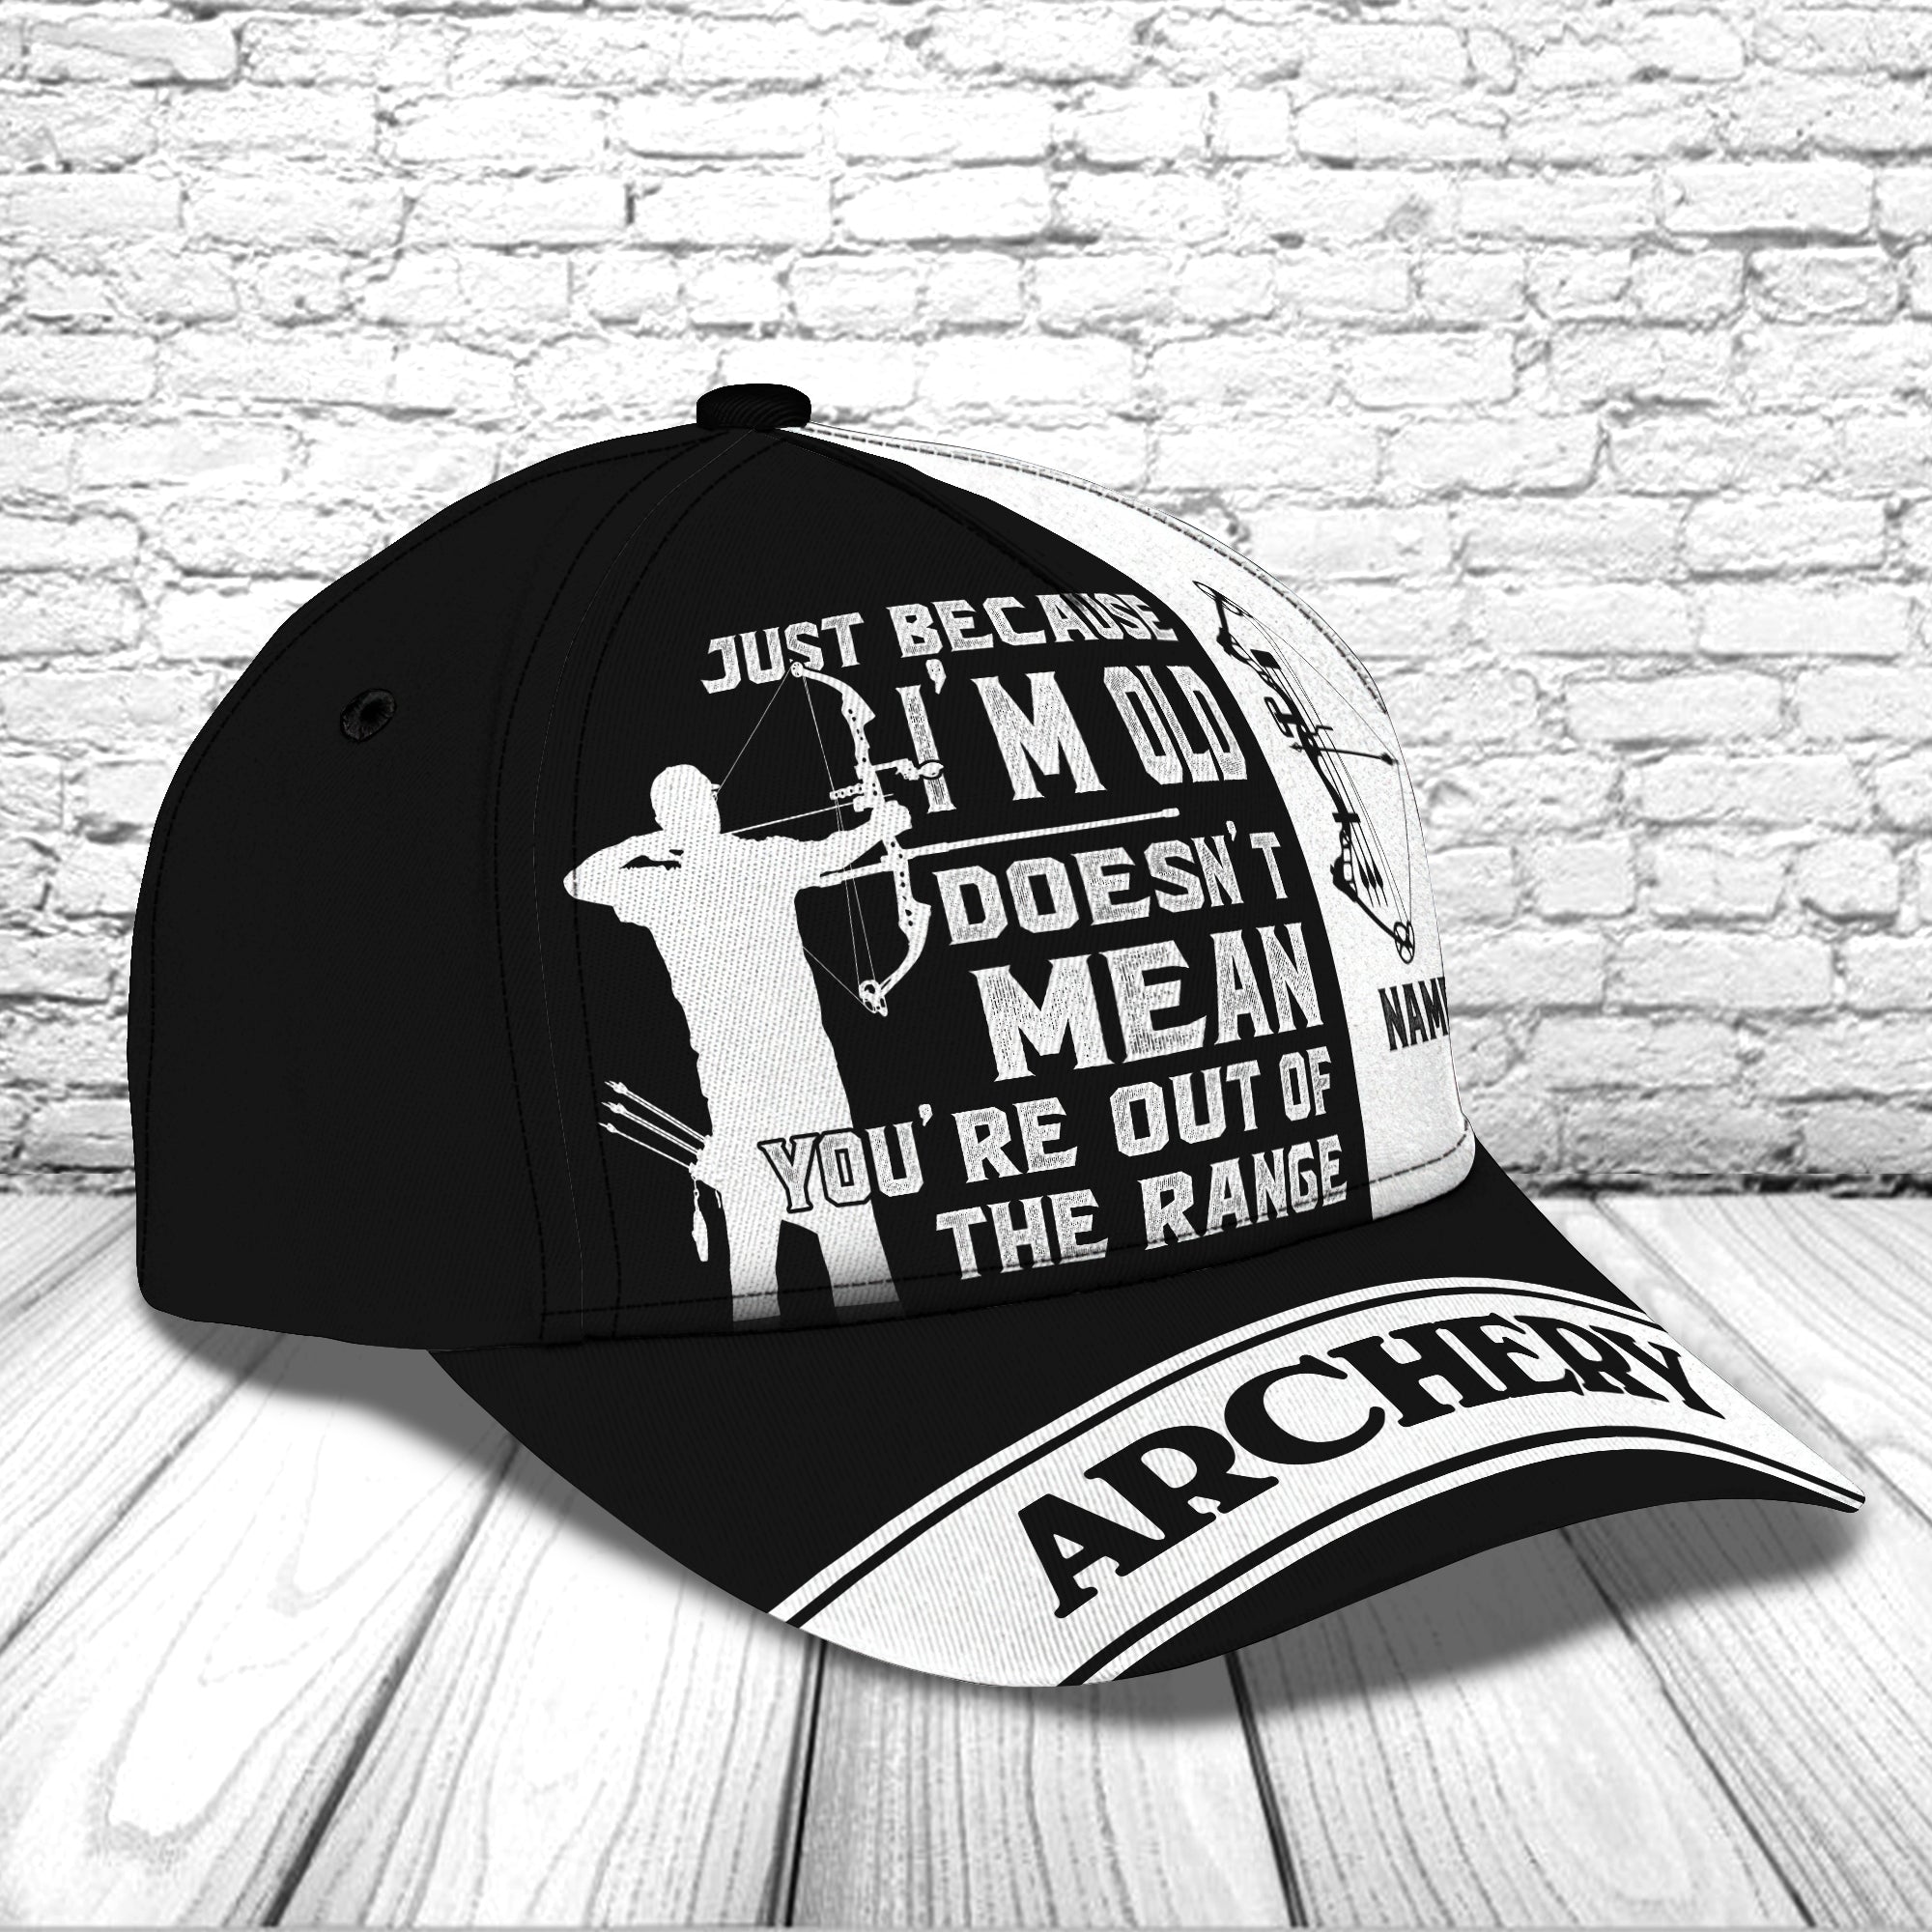 Personalized Name Archery Cap Hat/ Black and White Archery Cap/ Gift for Archer Cap